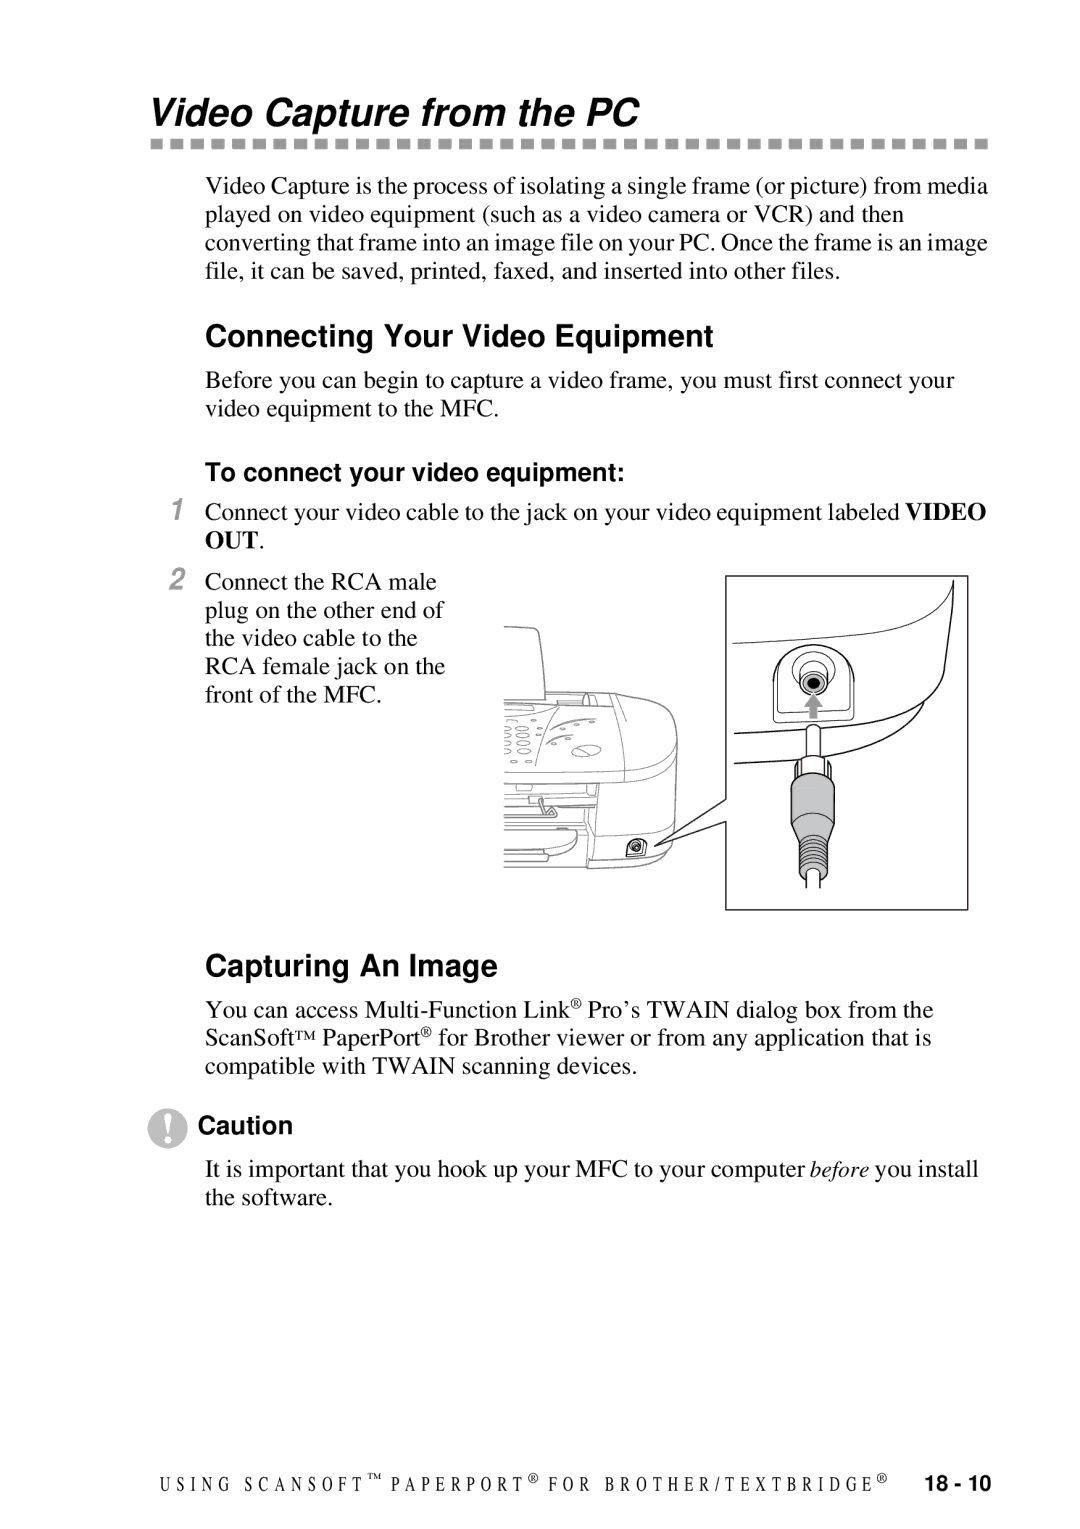 Brother MFC-7300C manual Video Capture from the PC, Connecting Your Video Equipment, Capturing An Image 